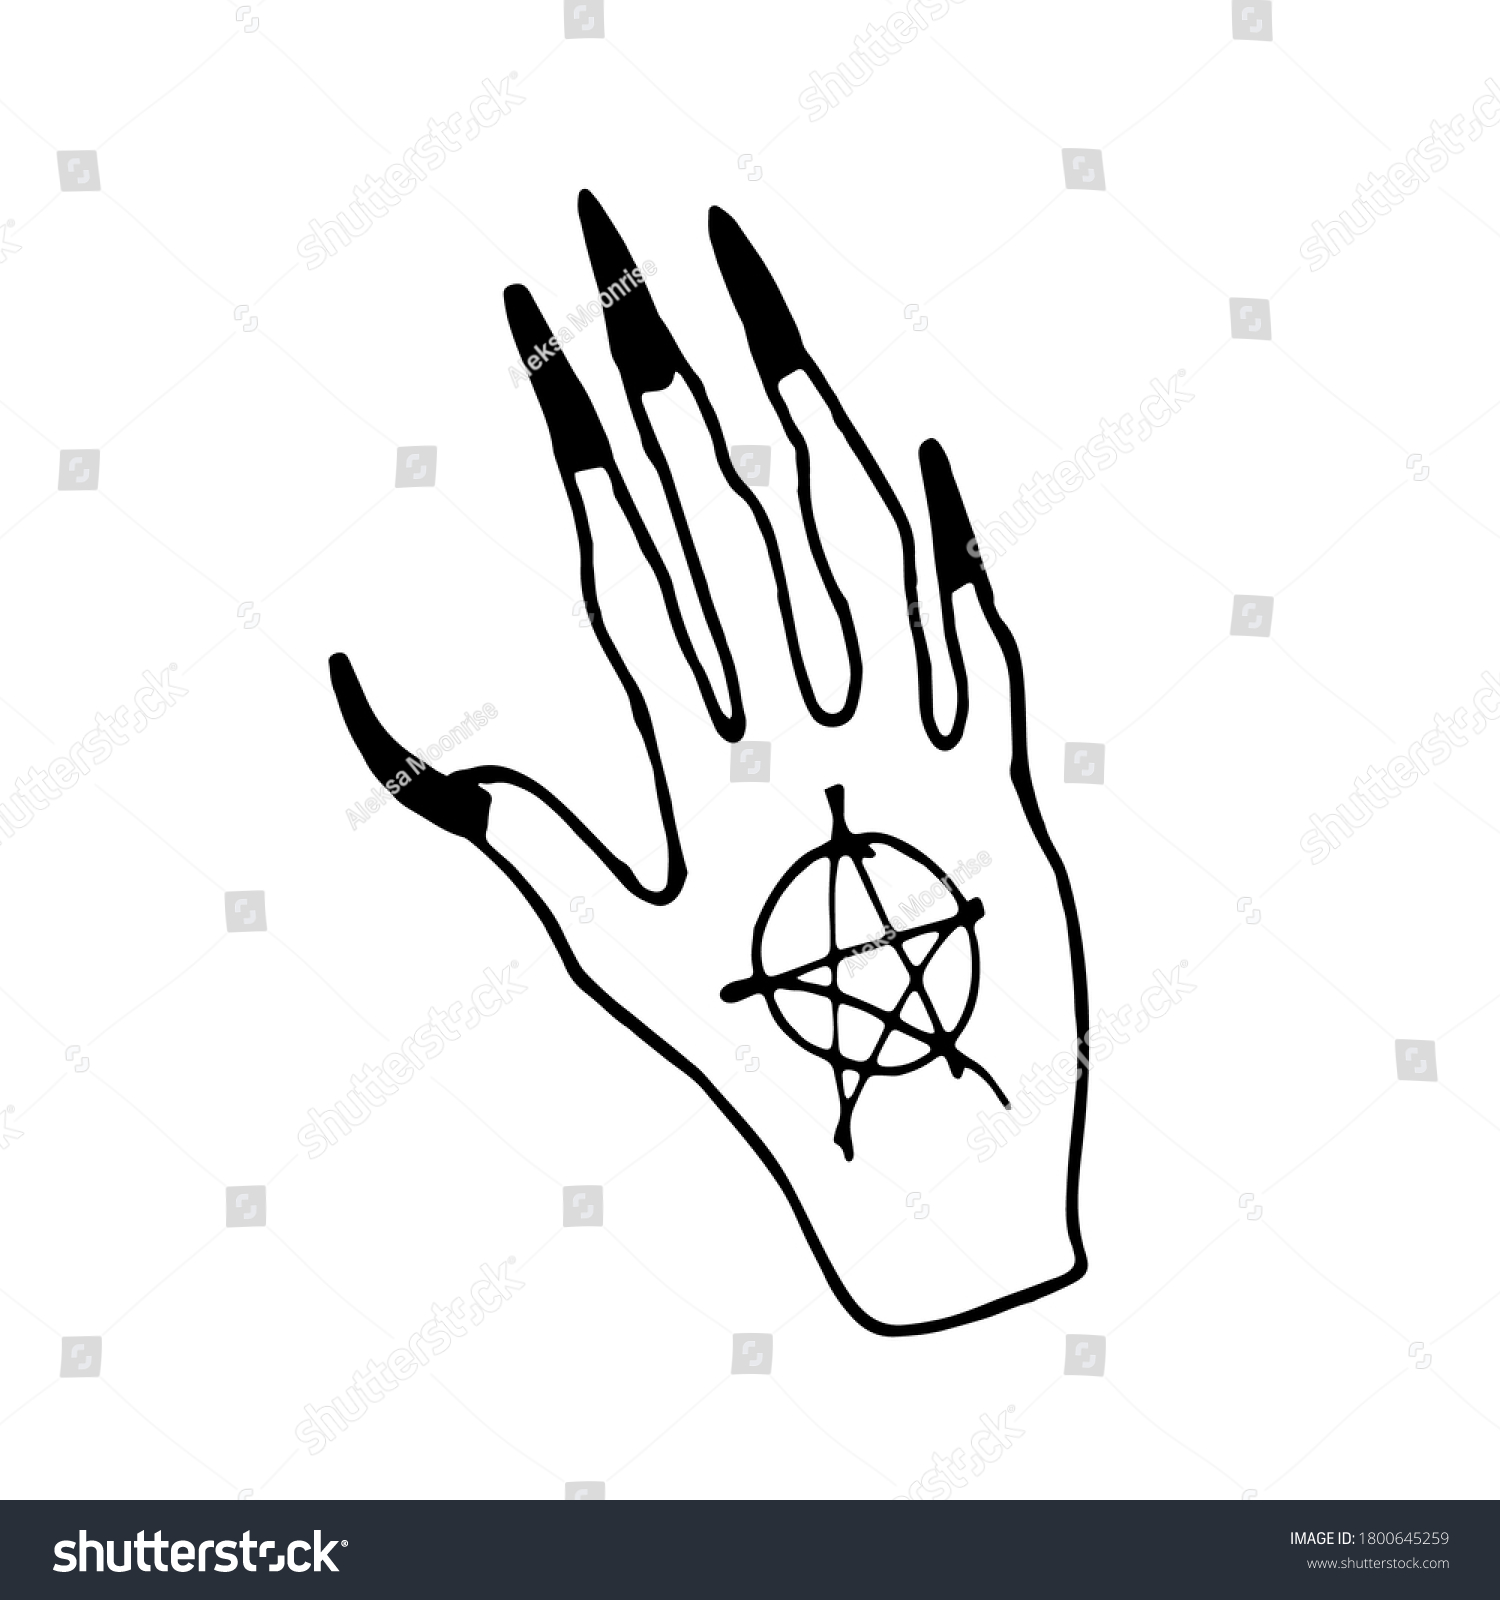 Hand Drawn Hand Witch Witch Hands Stock Vector (Royalty Free) 1800645259